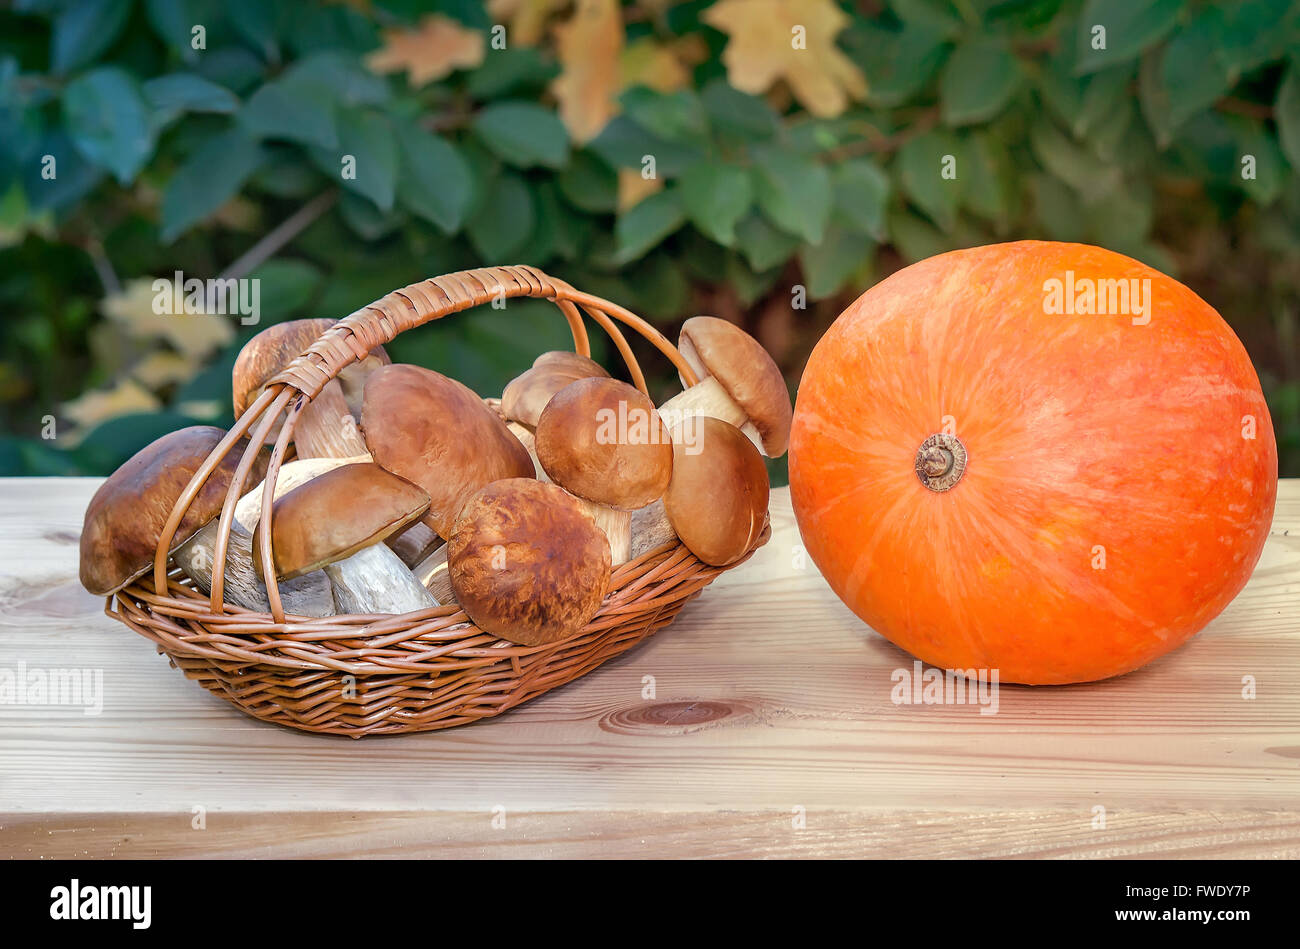 On the surface of the wooden table is a small wicker basket with mushrooms and pumpkin. Presented on the background of a green g Stock Photo